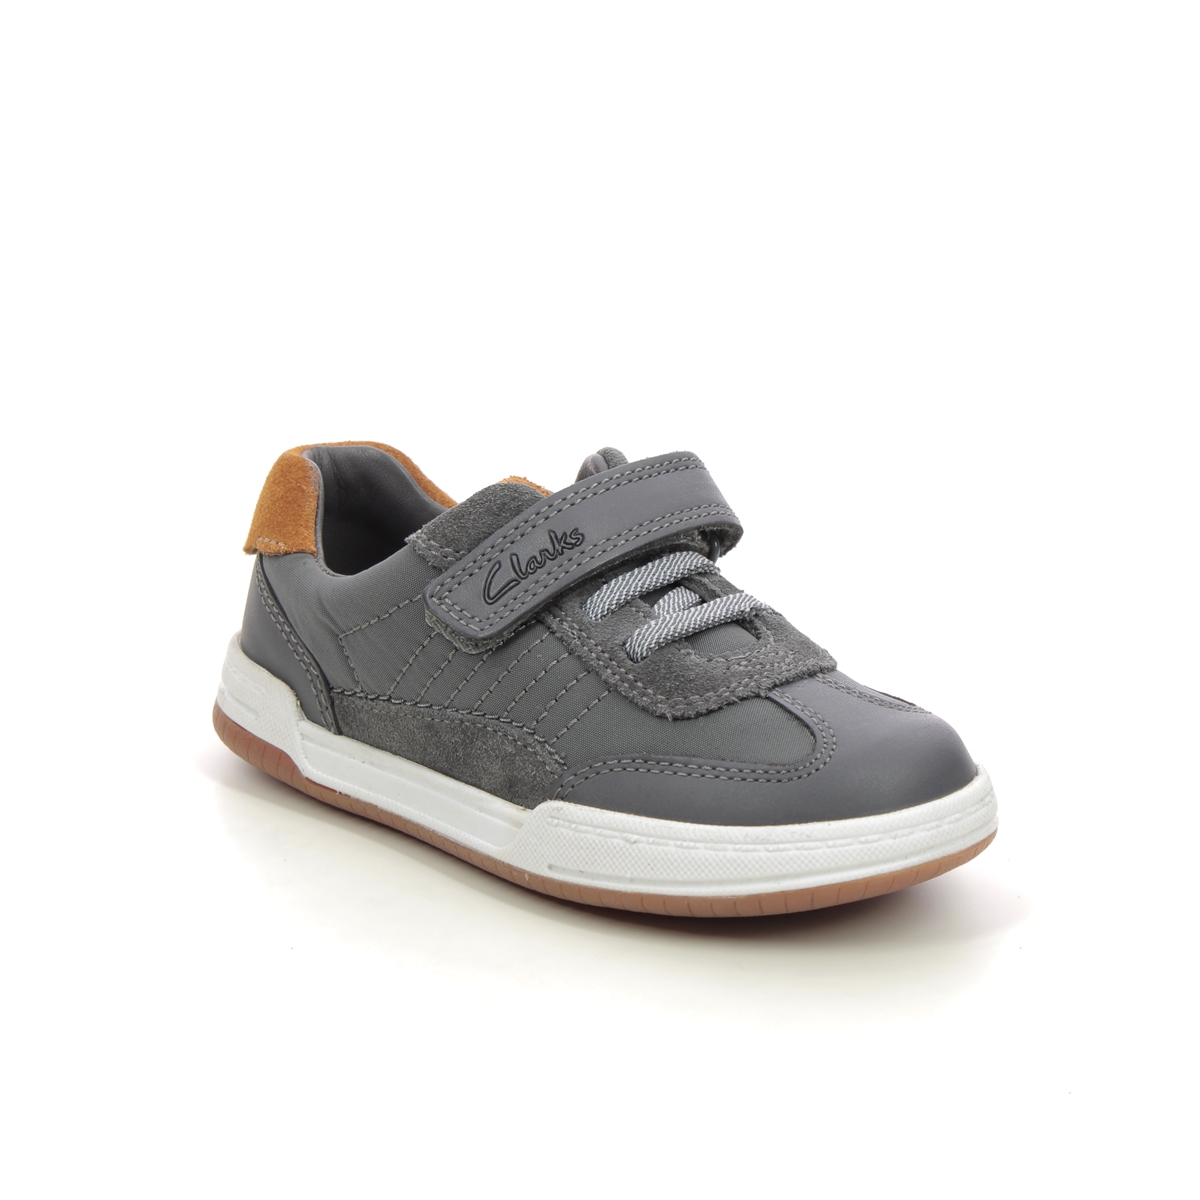 Clarks Fawn Family K Grey leather Kids Boys Toddler Shoes 7511-56F in a Plain Leather in Size 9